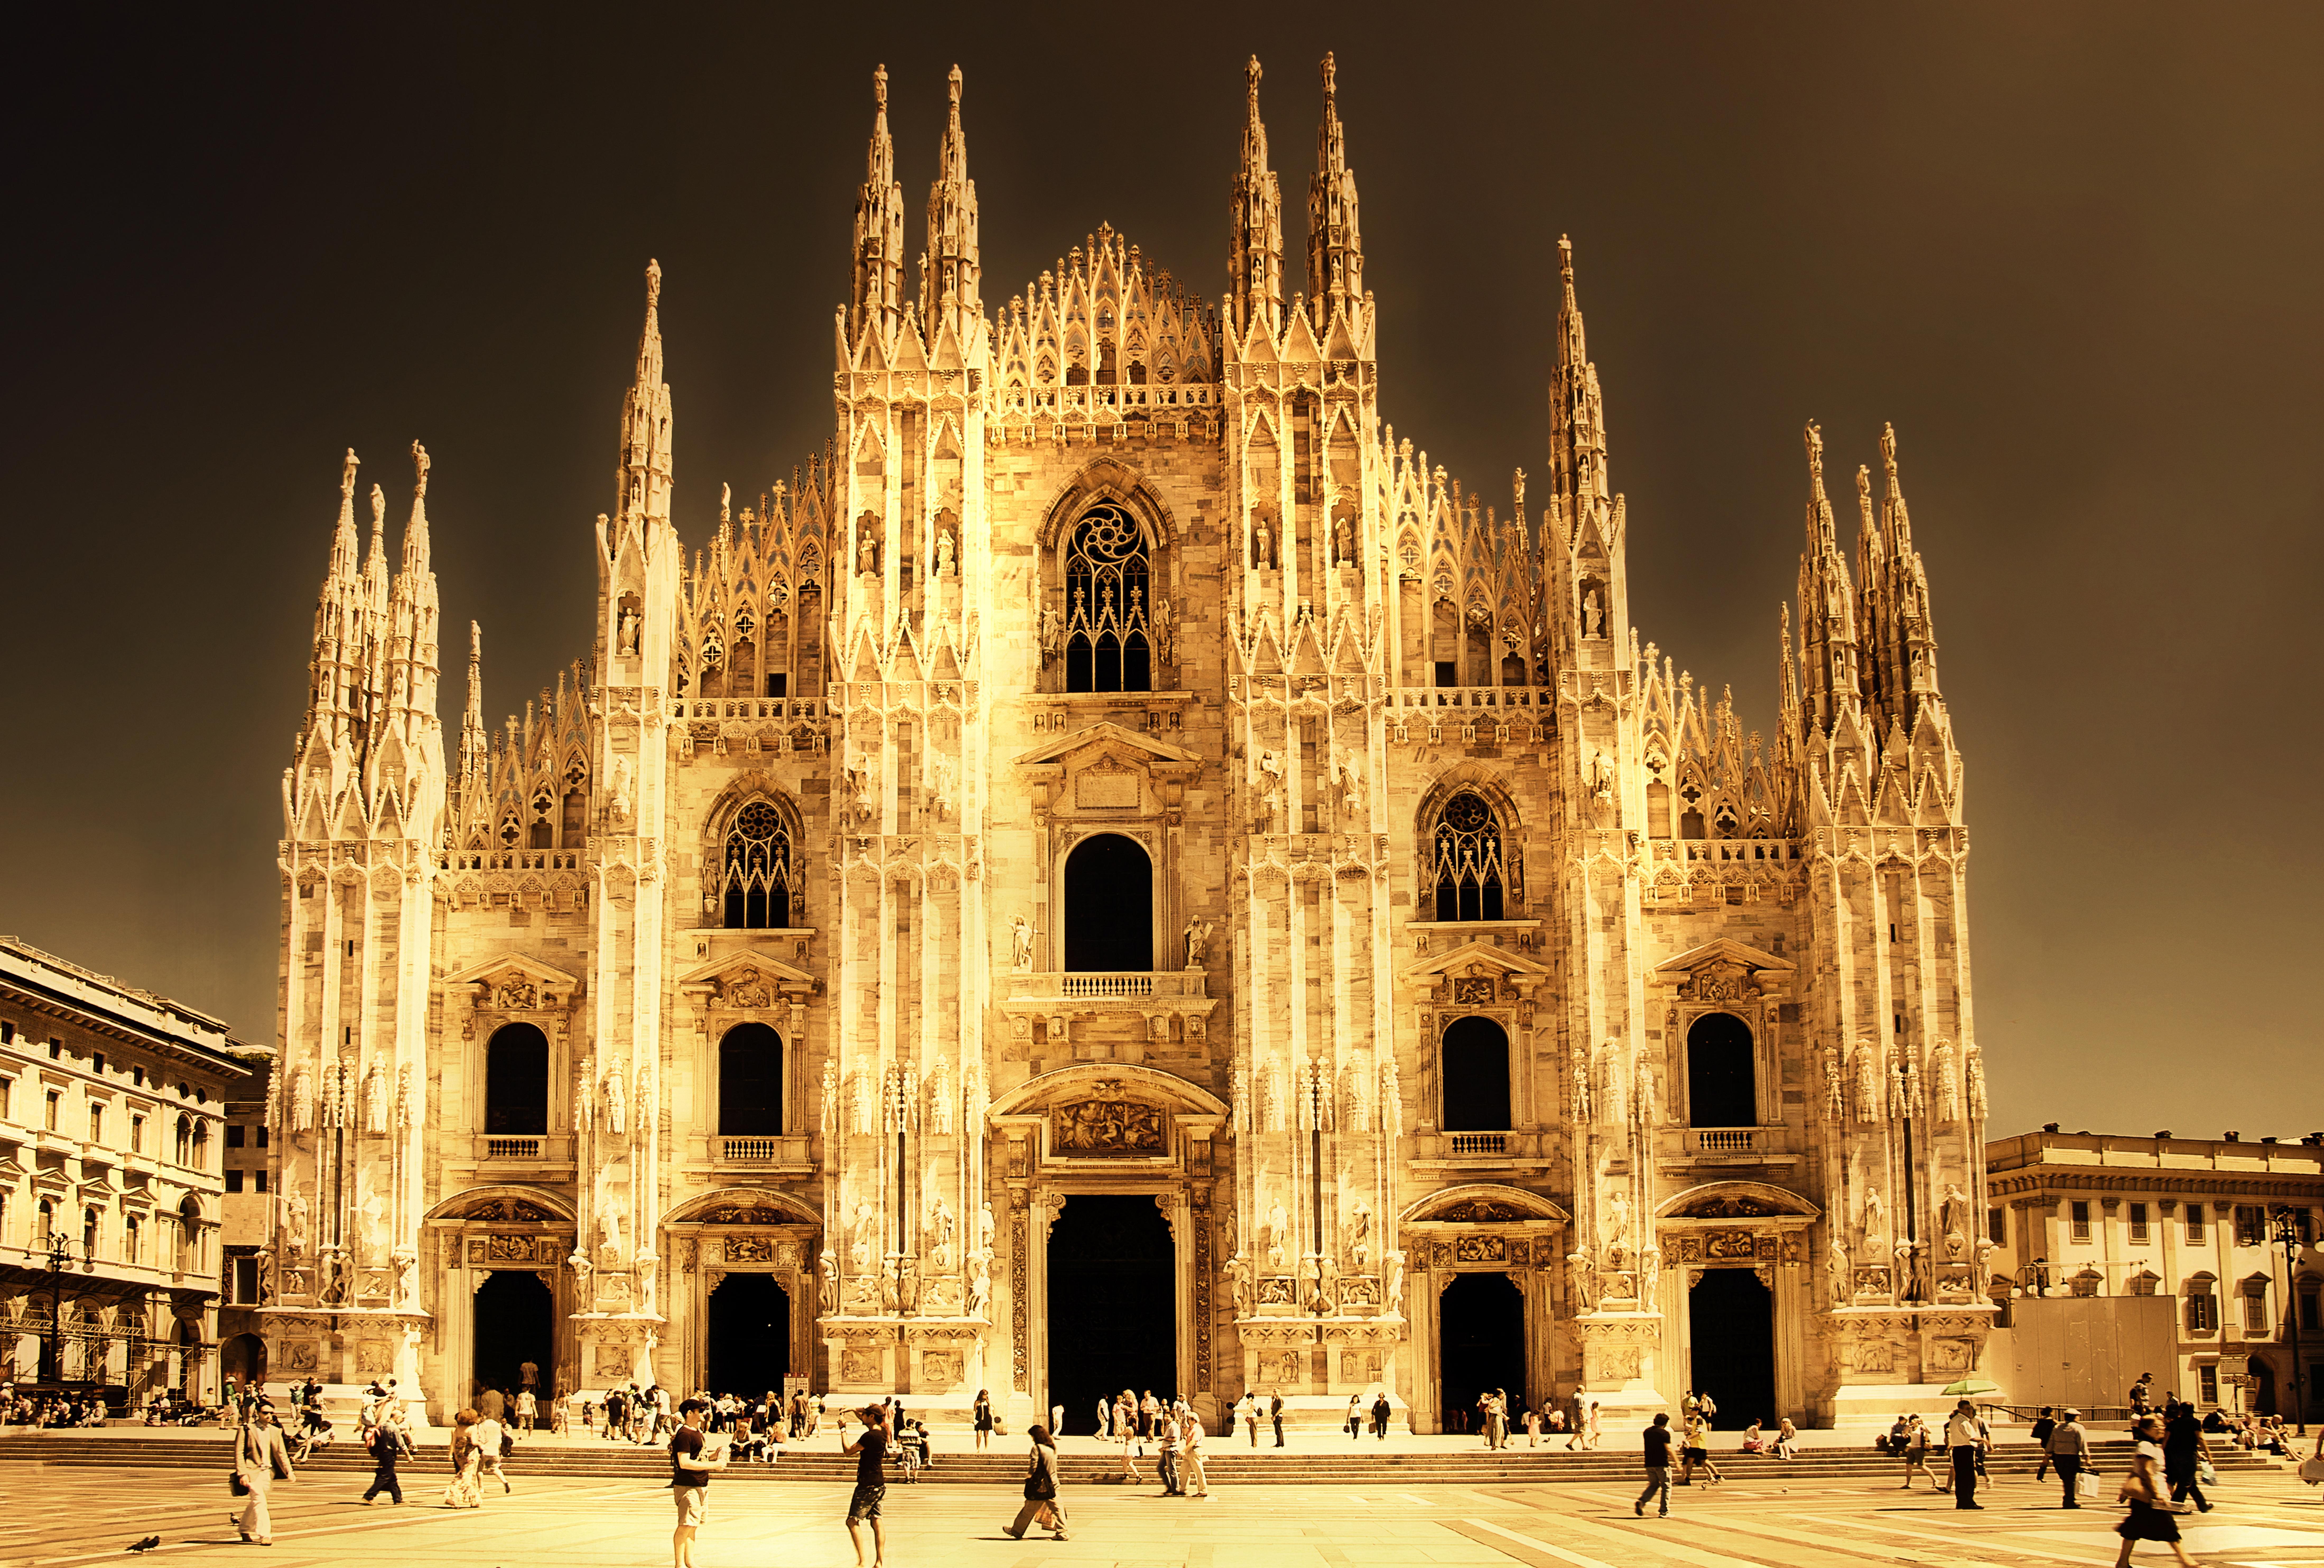 HQ Milan Cathedral Wallpapers | File 4974.71Kb